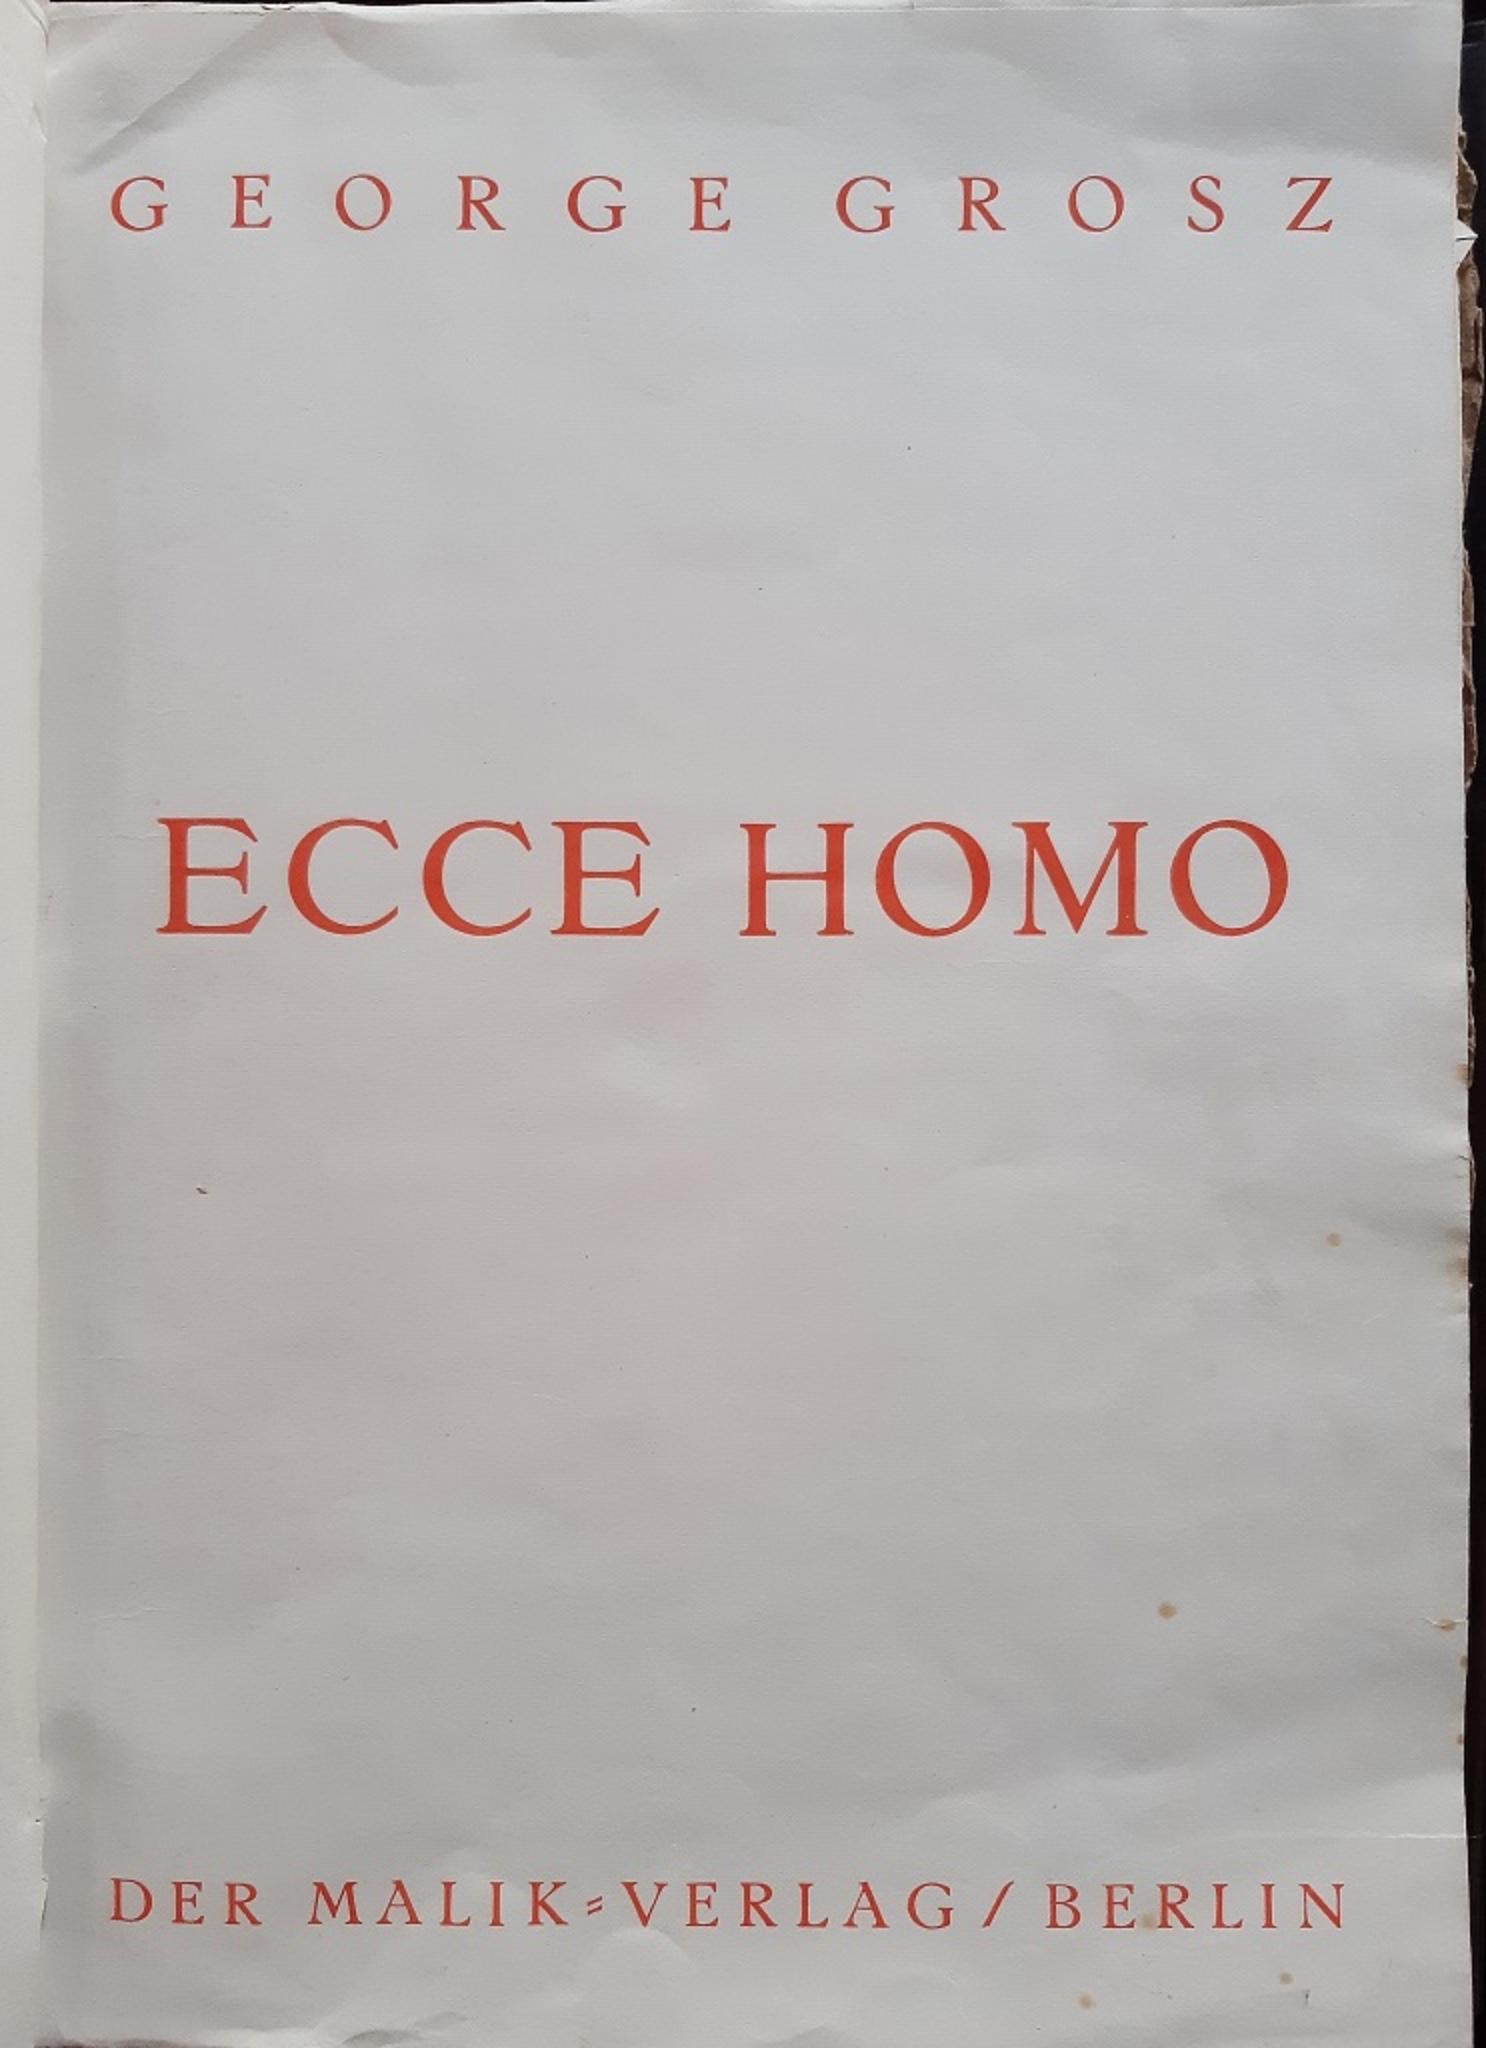 Ecce Homo - Rare Book Illustrated by George Grosz - 1923 For Sale 2